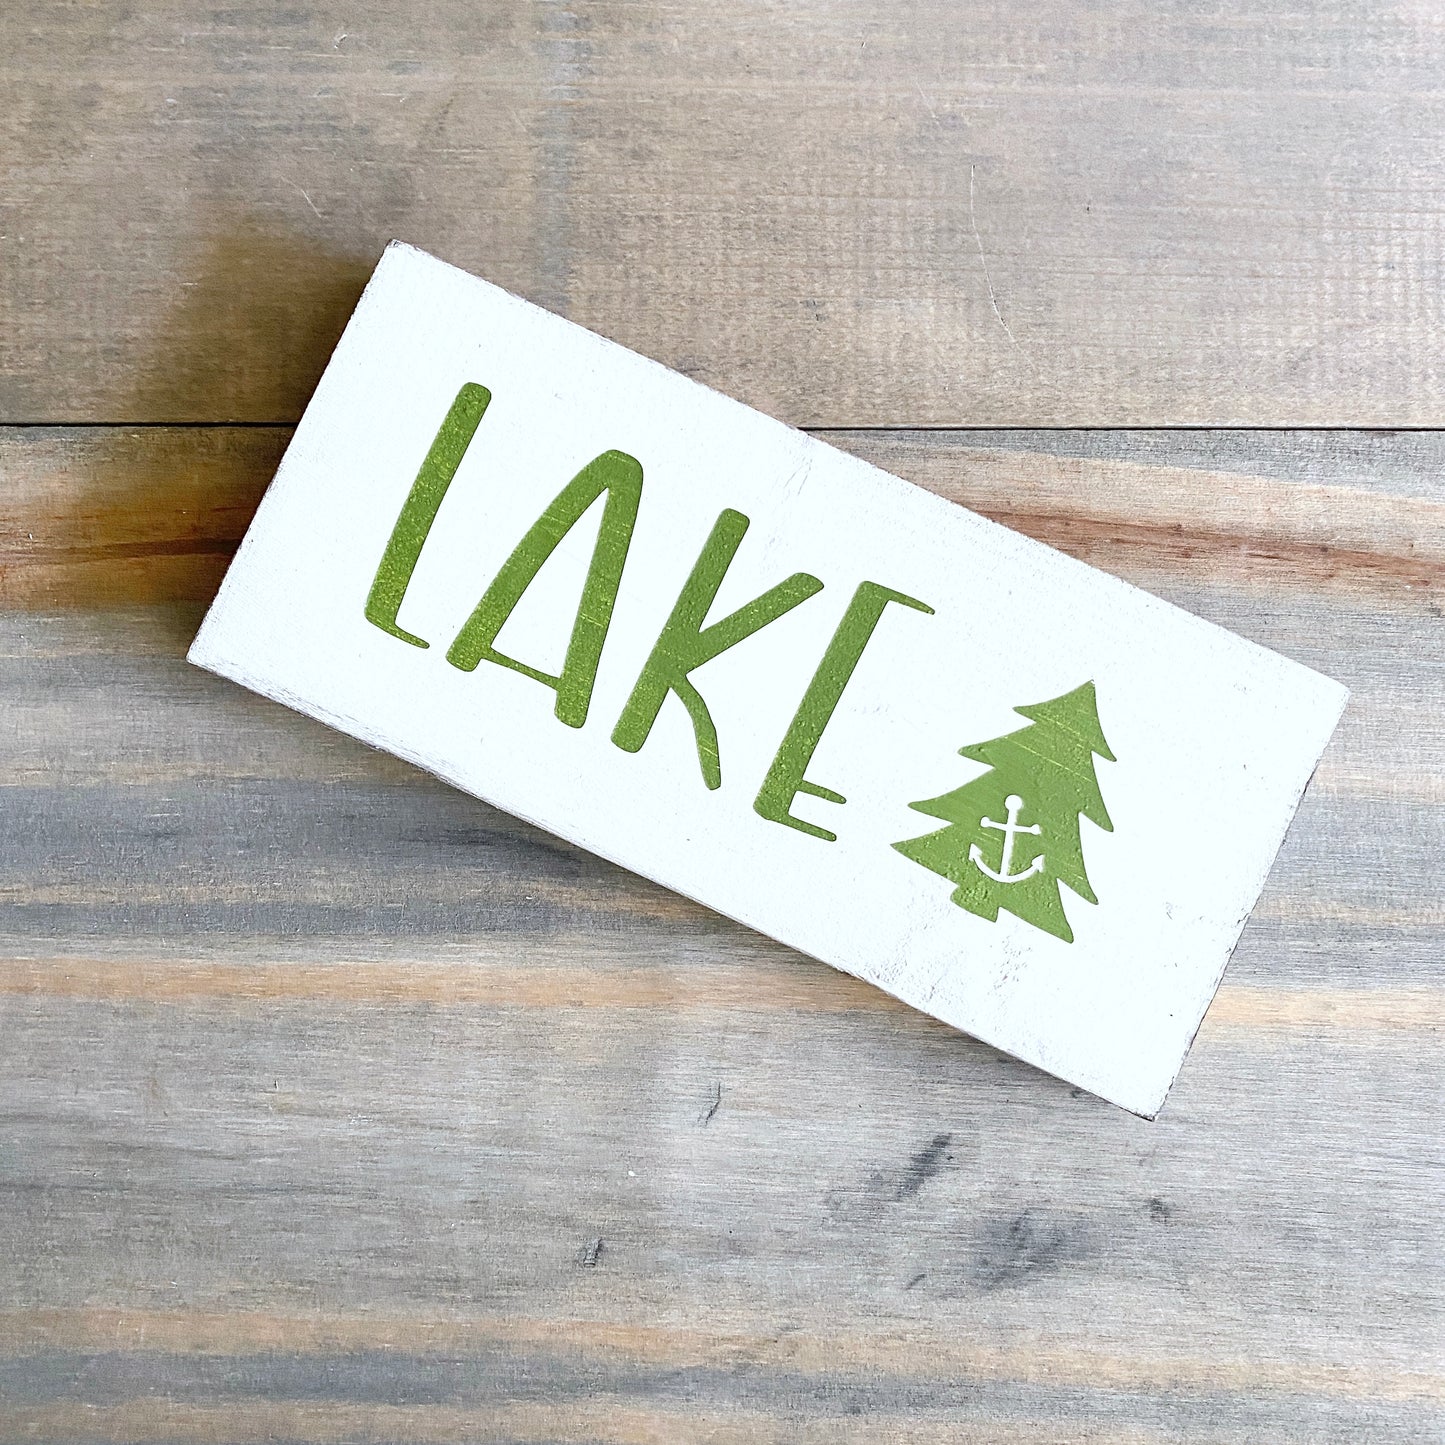 Nautical Christmas Decor for Lake House, Anchored Soul Designs Lake Christmas wood sign white background with green design, lake house holiday decor nautical designNautical Christmas Decor for Lake House, Anchored Soul Designs Lake Christmas wood sign white background with green design, lake house holiday decor nautical design